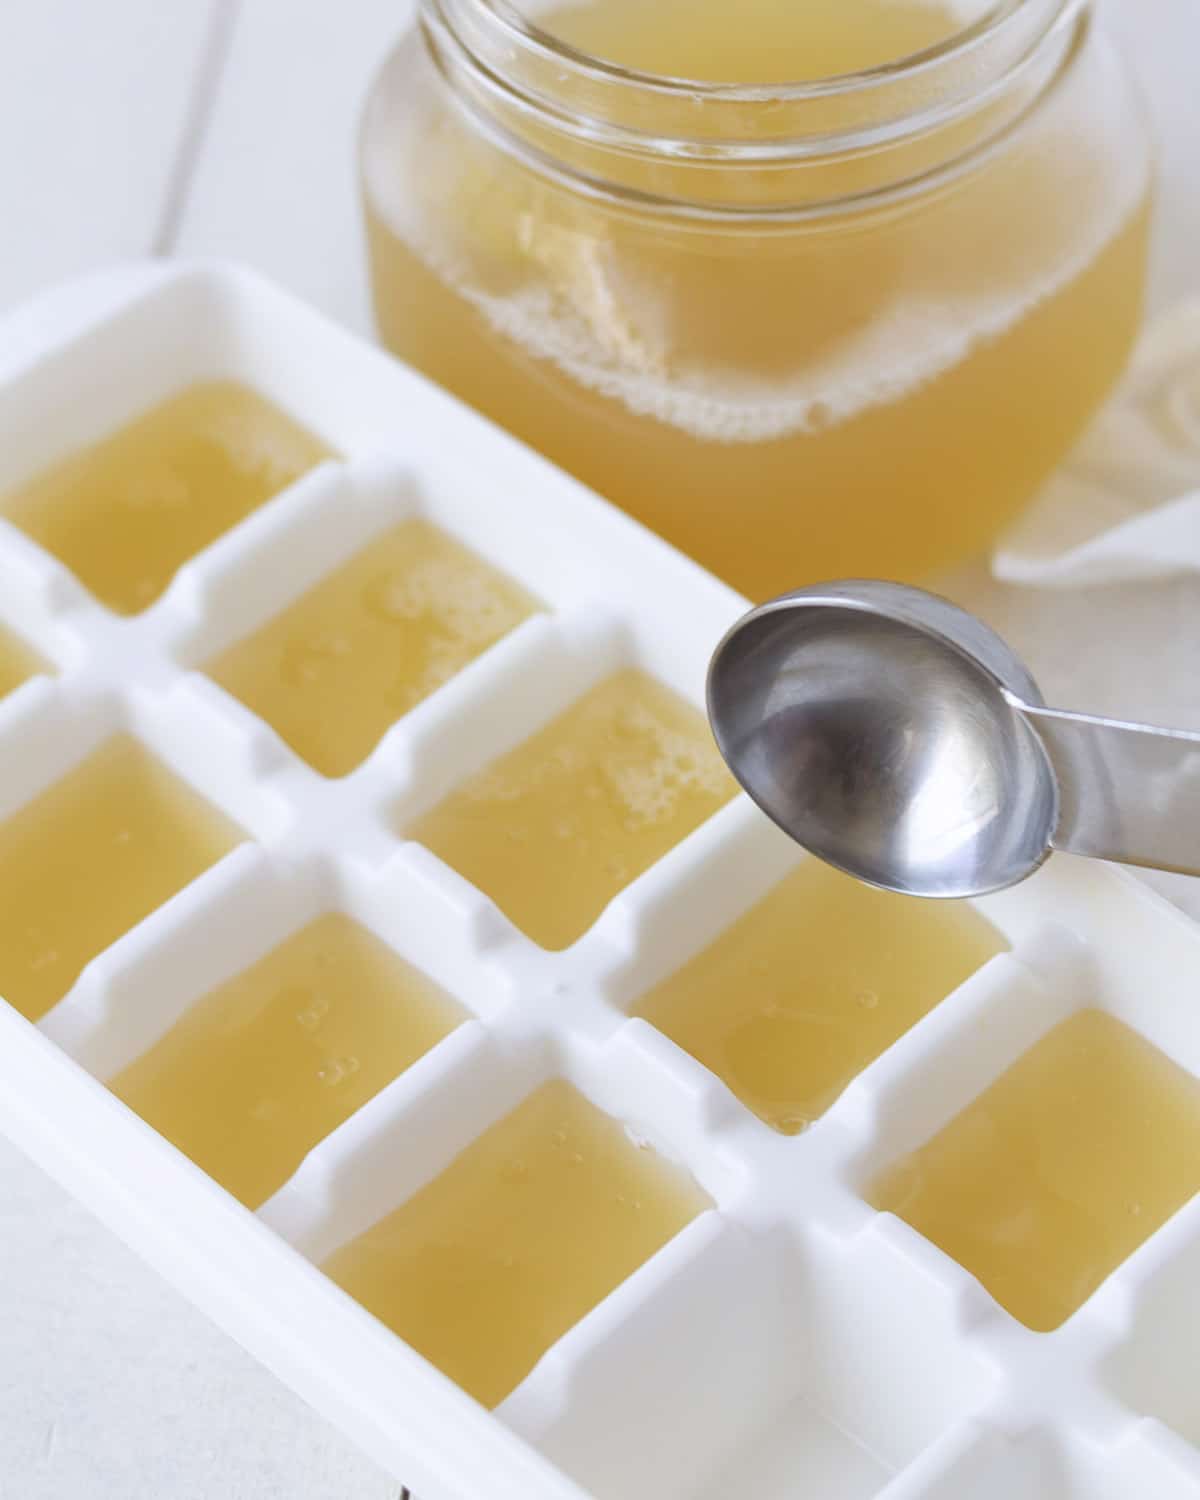 A tablespoon measure adding homemade aquafaba to an ice cube tray for freezing.